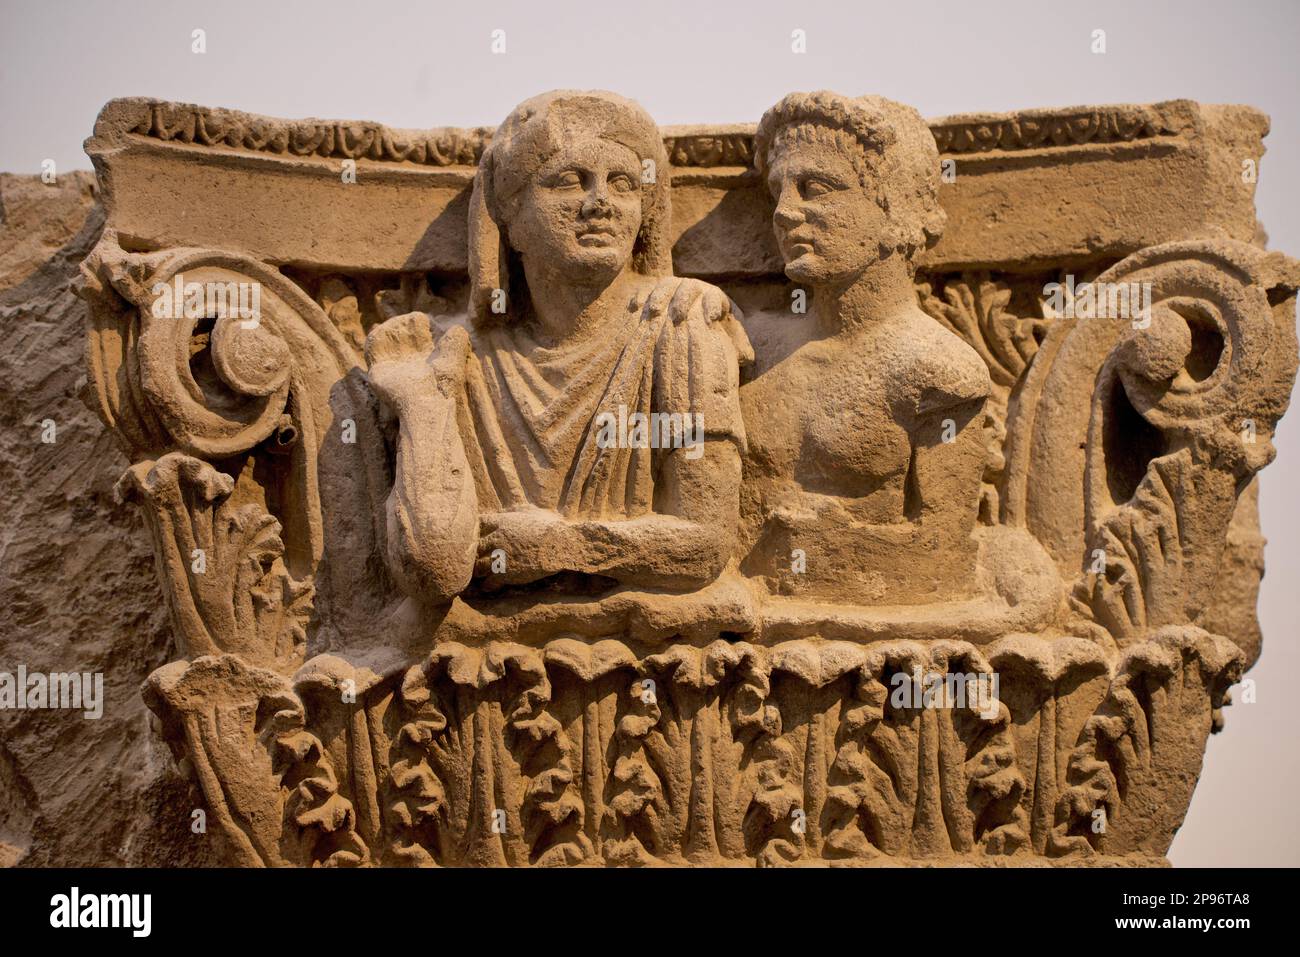 Ornately carved Roman tufa stone capital from Pompeii depicting married couple. Second half of second century BCE.   Pompeii's Antiquarium first opened in 1873, but closed in 1980, only reopening as a museum again with a permanent display of artefacts in 2021. Pompeii, Naples, Italy Stock Photo